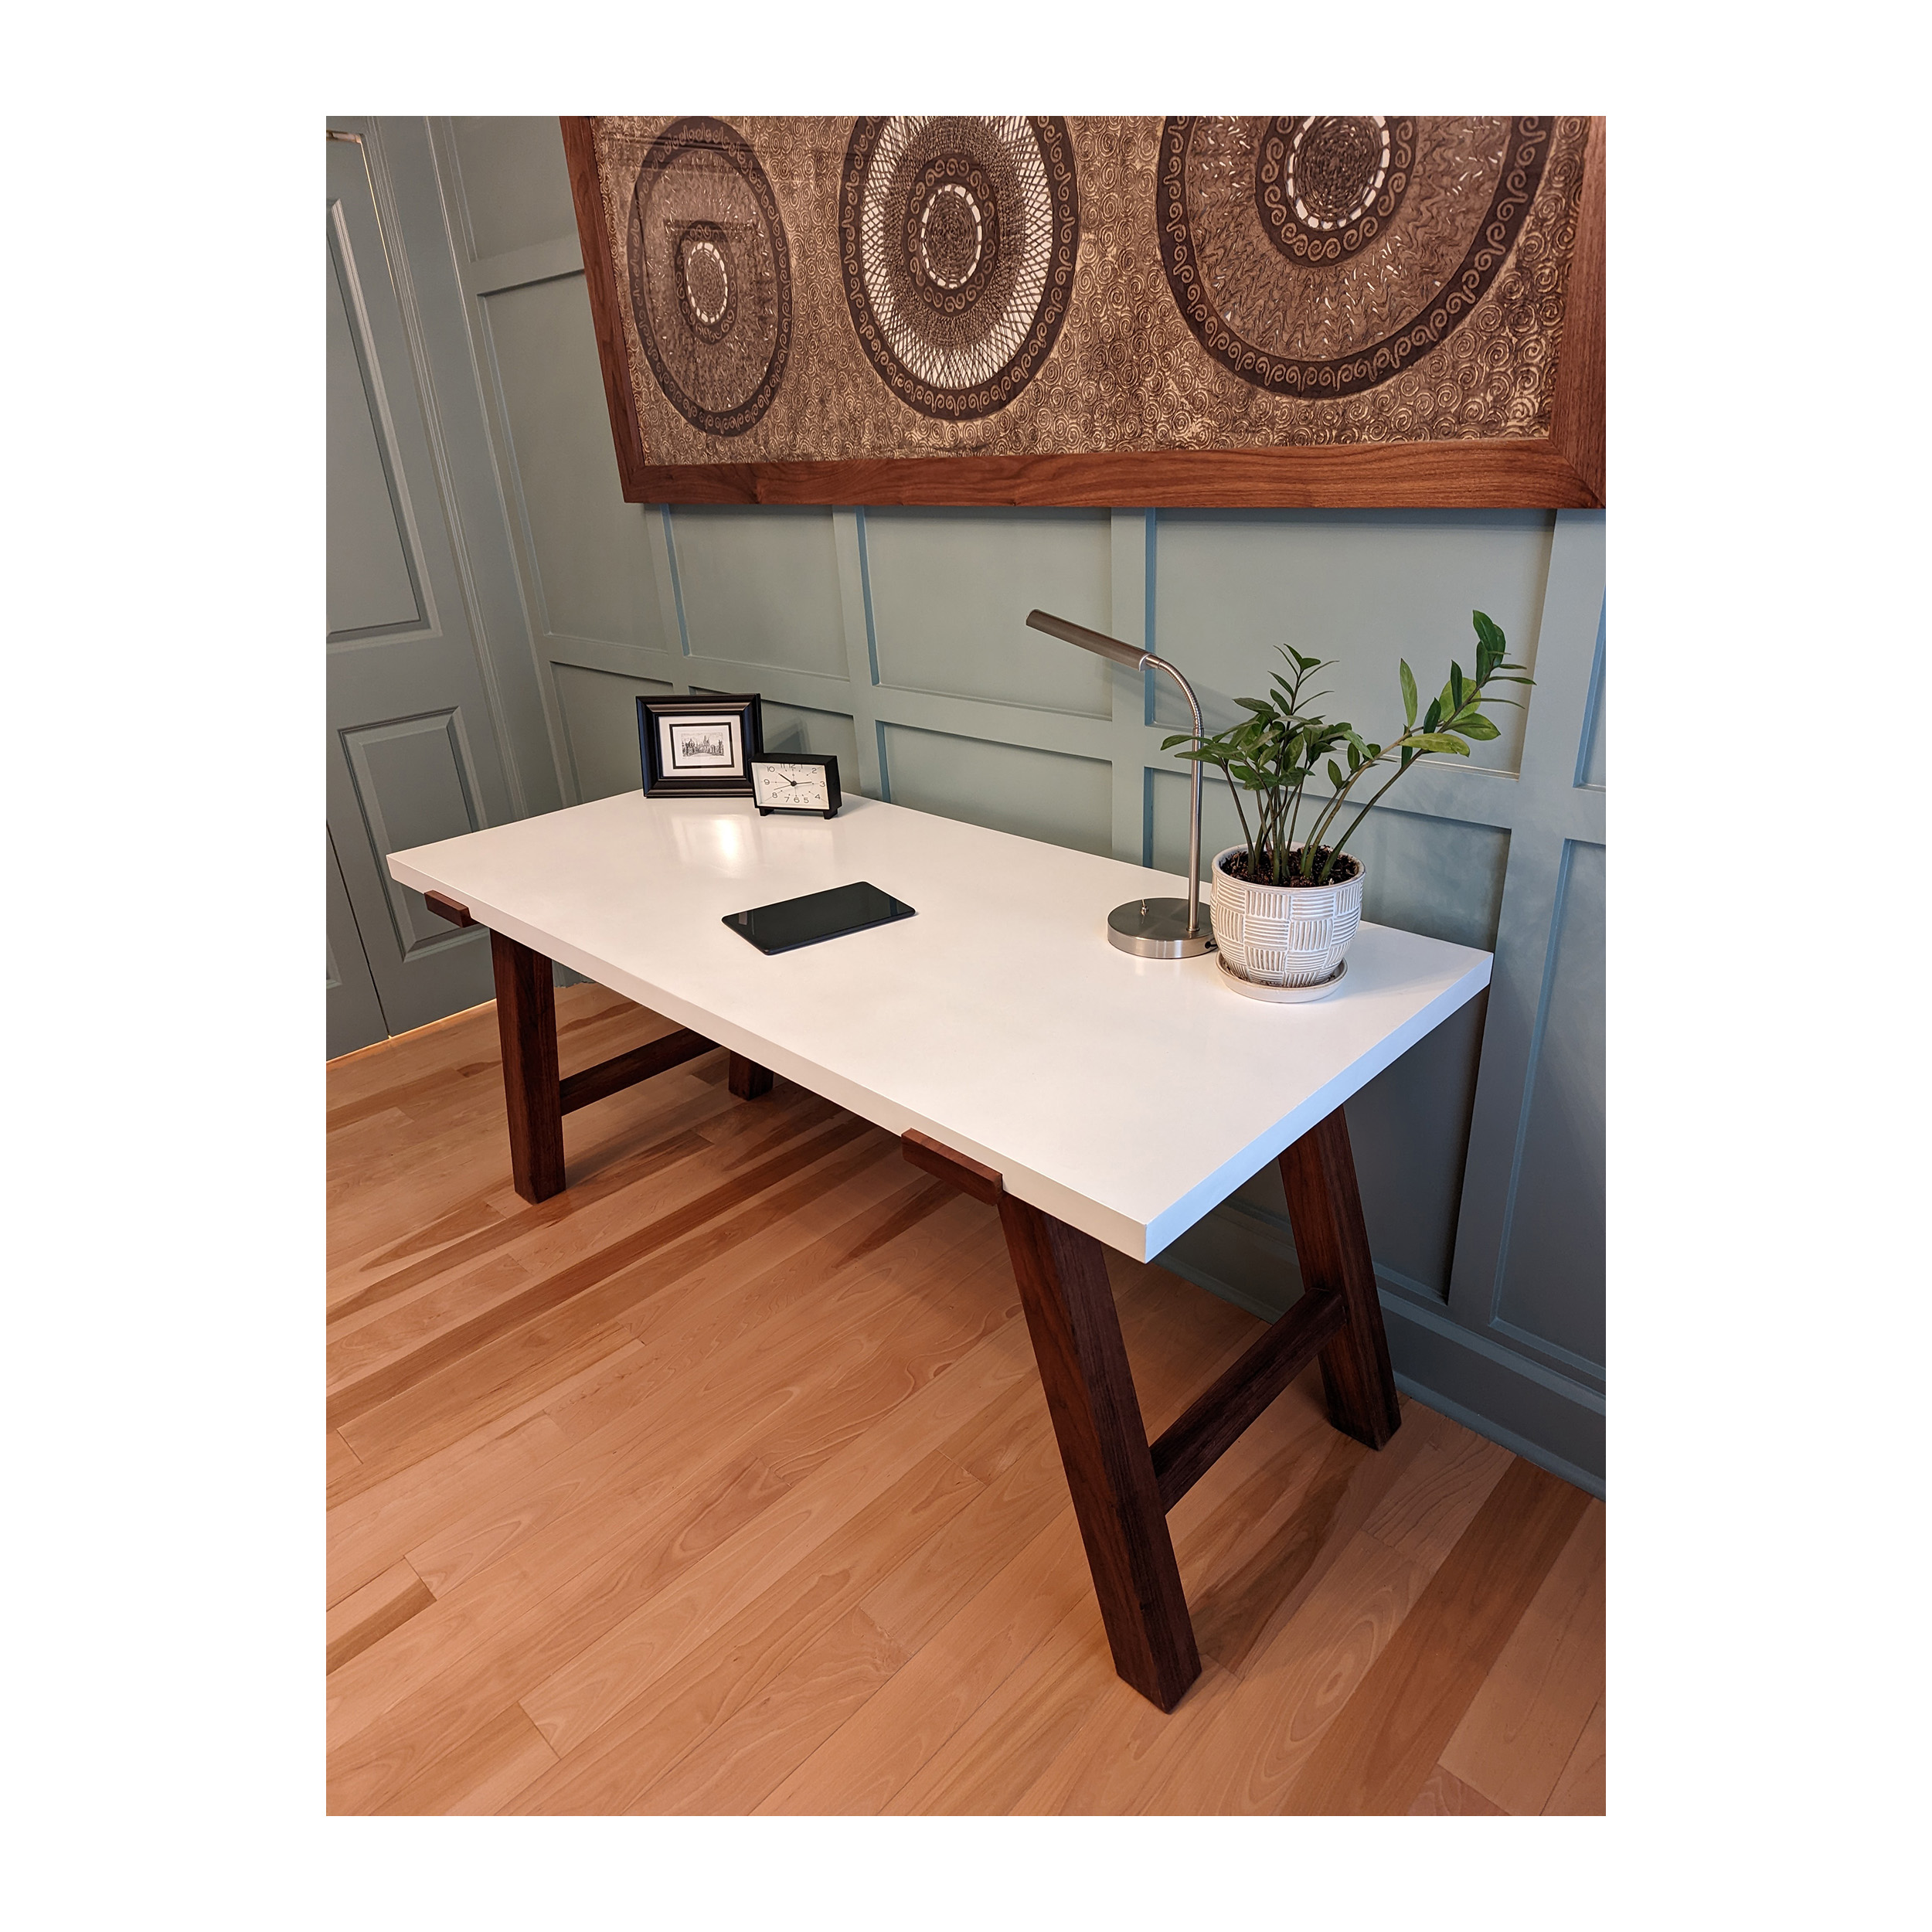 Large Walnut Modern Desk With A White Top And Solid Wood Construction--Made By 57NorthPlank Tailored Fine Furniture